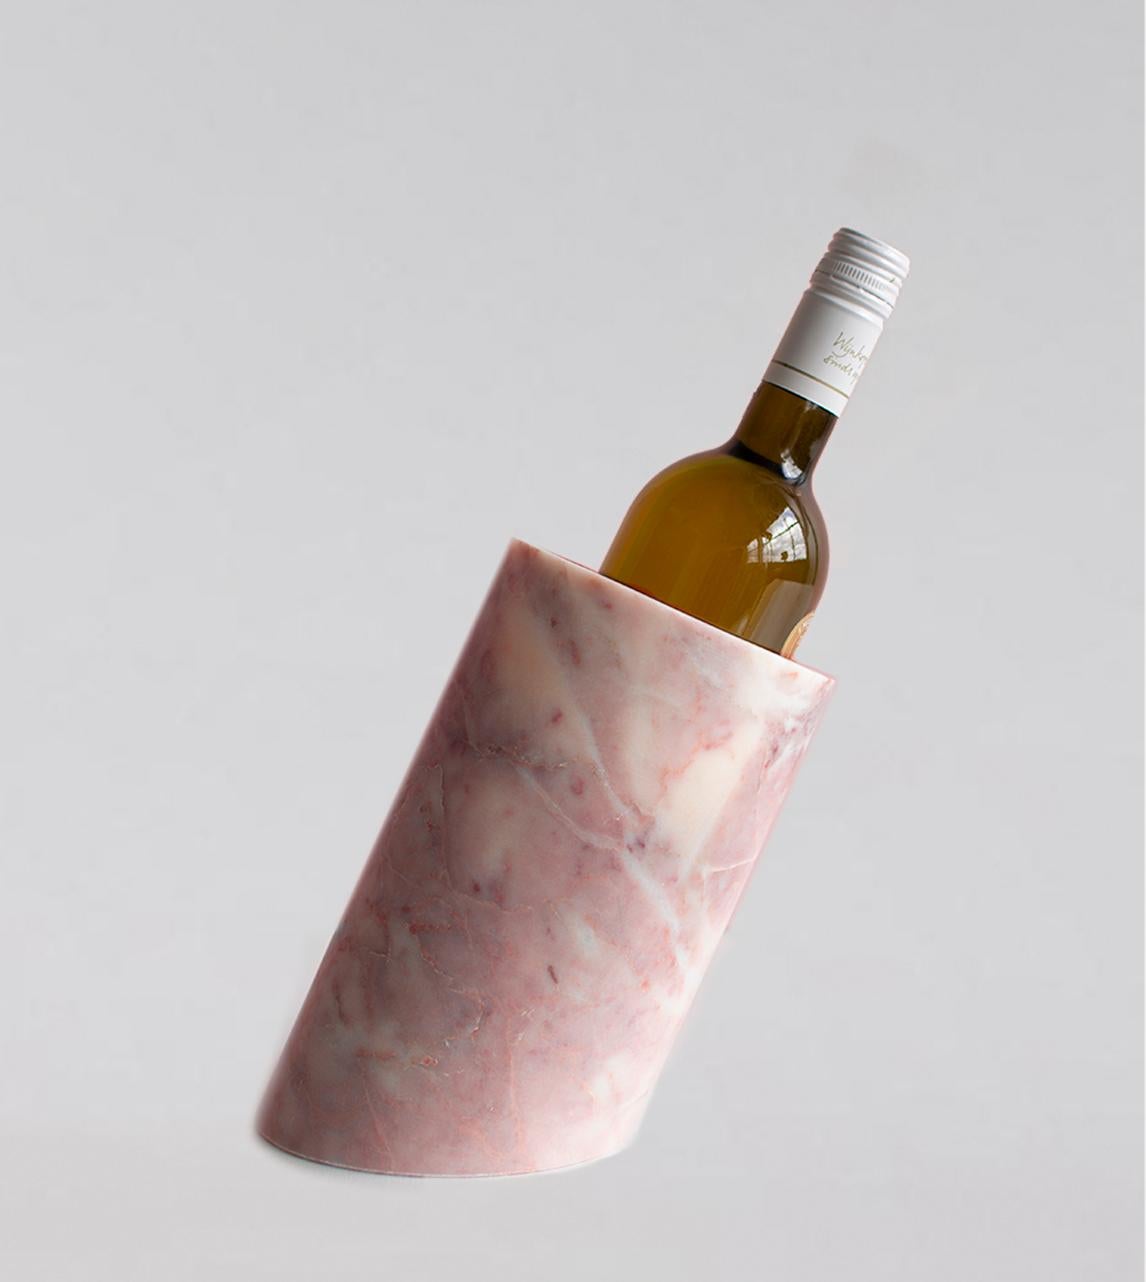 Our wine cooler is designed by us and hand crafted by the artisans within the fair-trade principles.

The natural properties of the marble will keep your wine chilled with no need for ice - you can also place this marble cooler in the fridge for